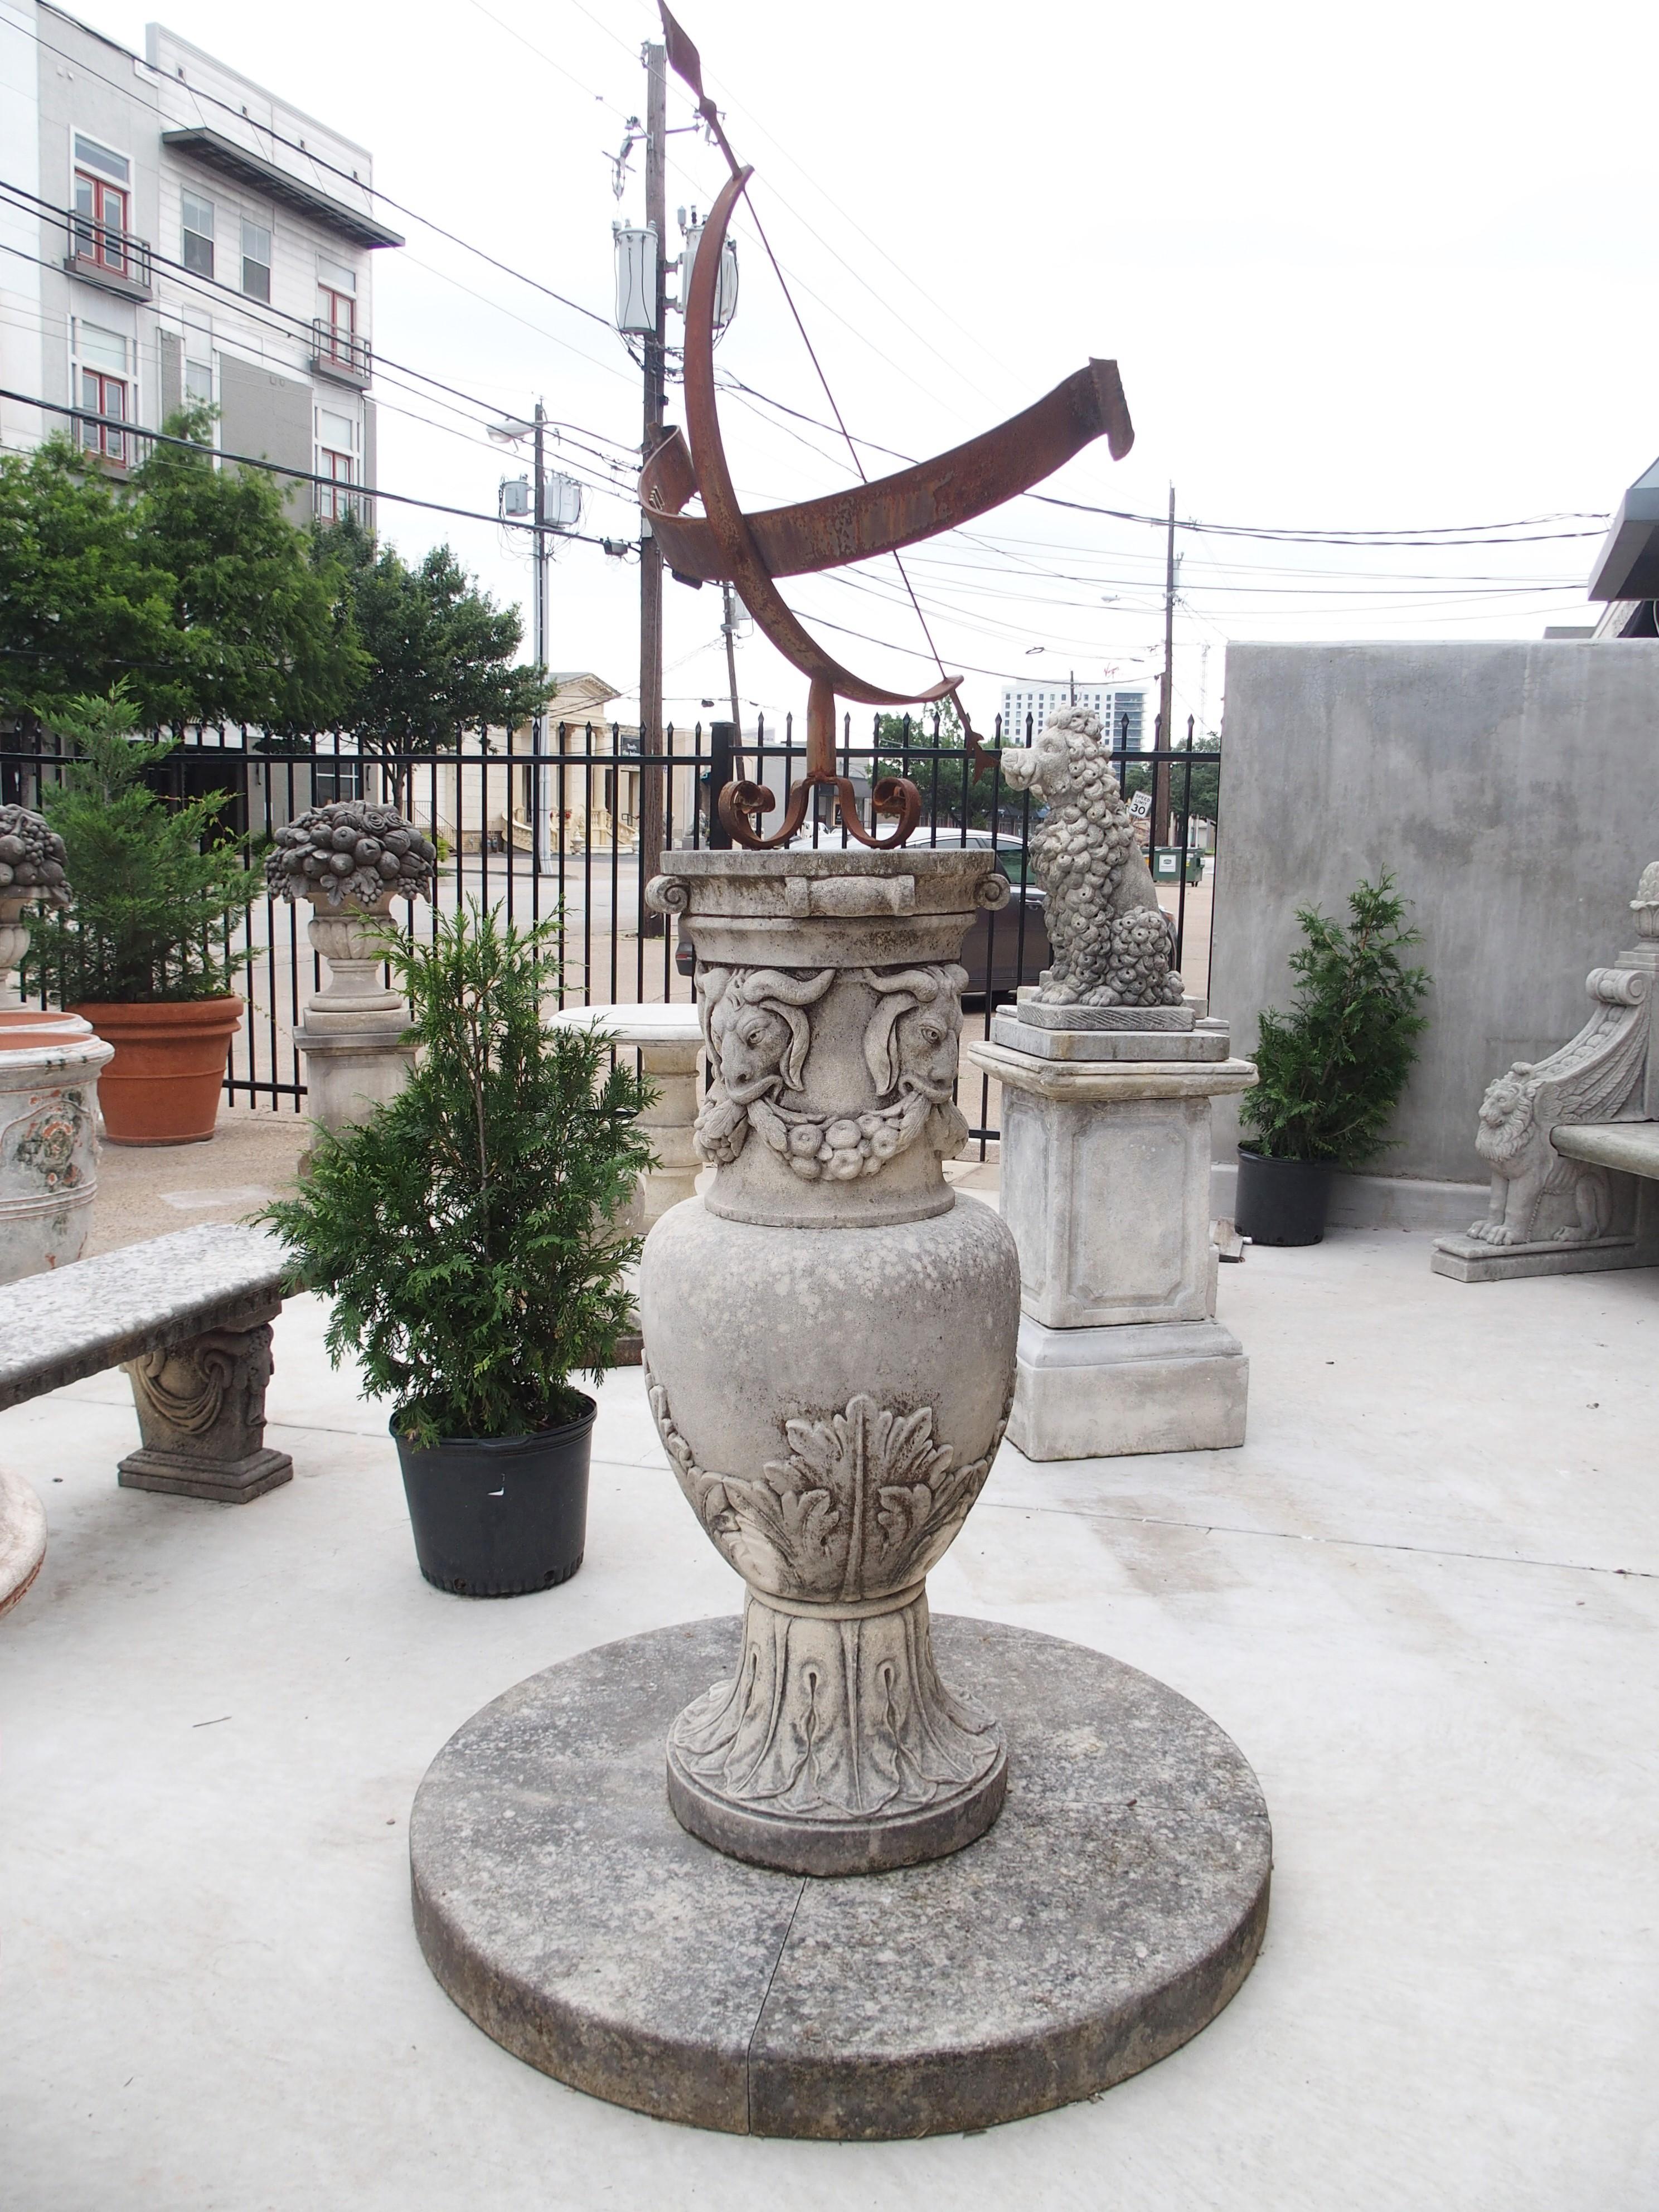 This large limestone sundial with wrought iron armillary sphere will make a grand statement in any garden. Sometimes called an “equatorial sundial”, the armillary was invented by ancient Greeks. In its original format, armillary spheres were